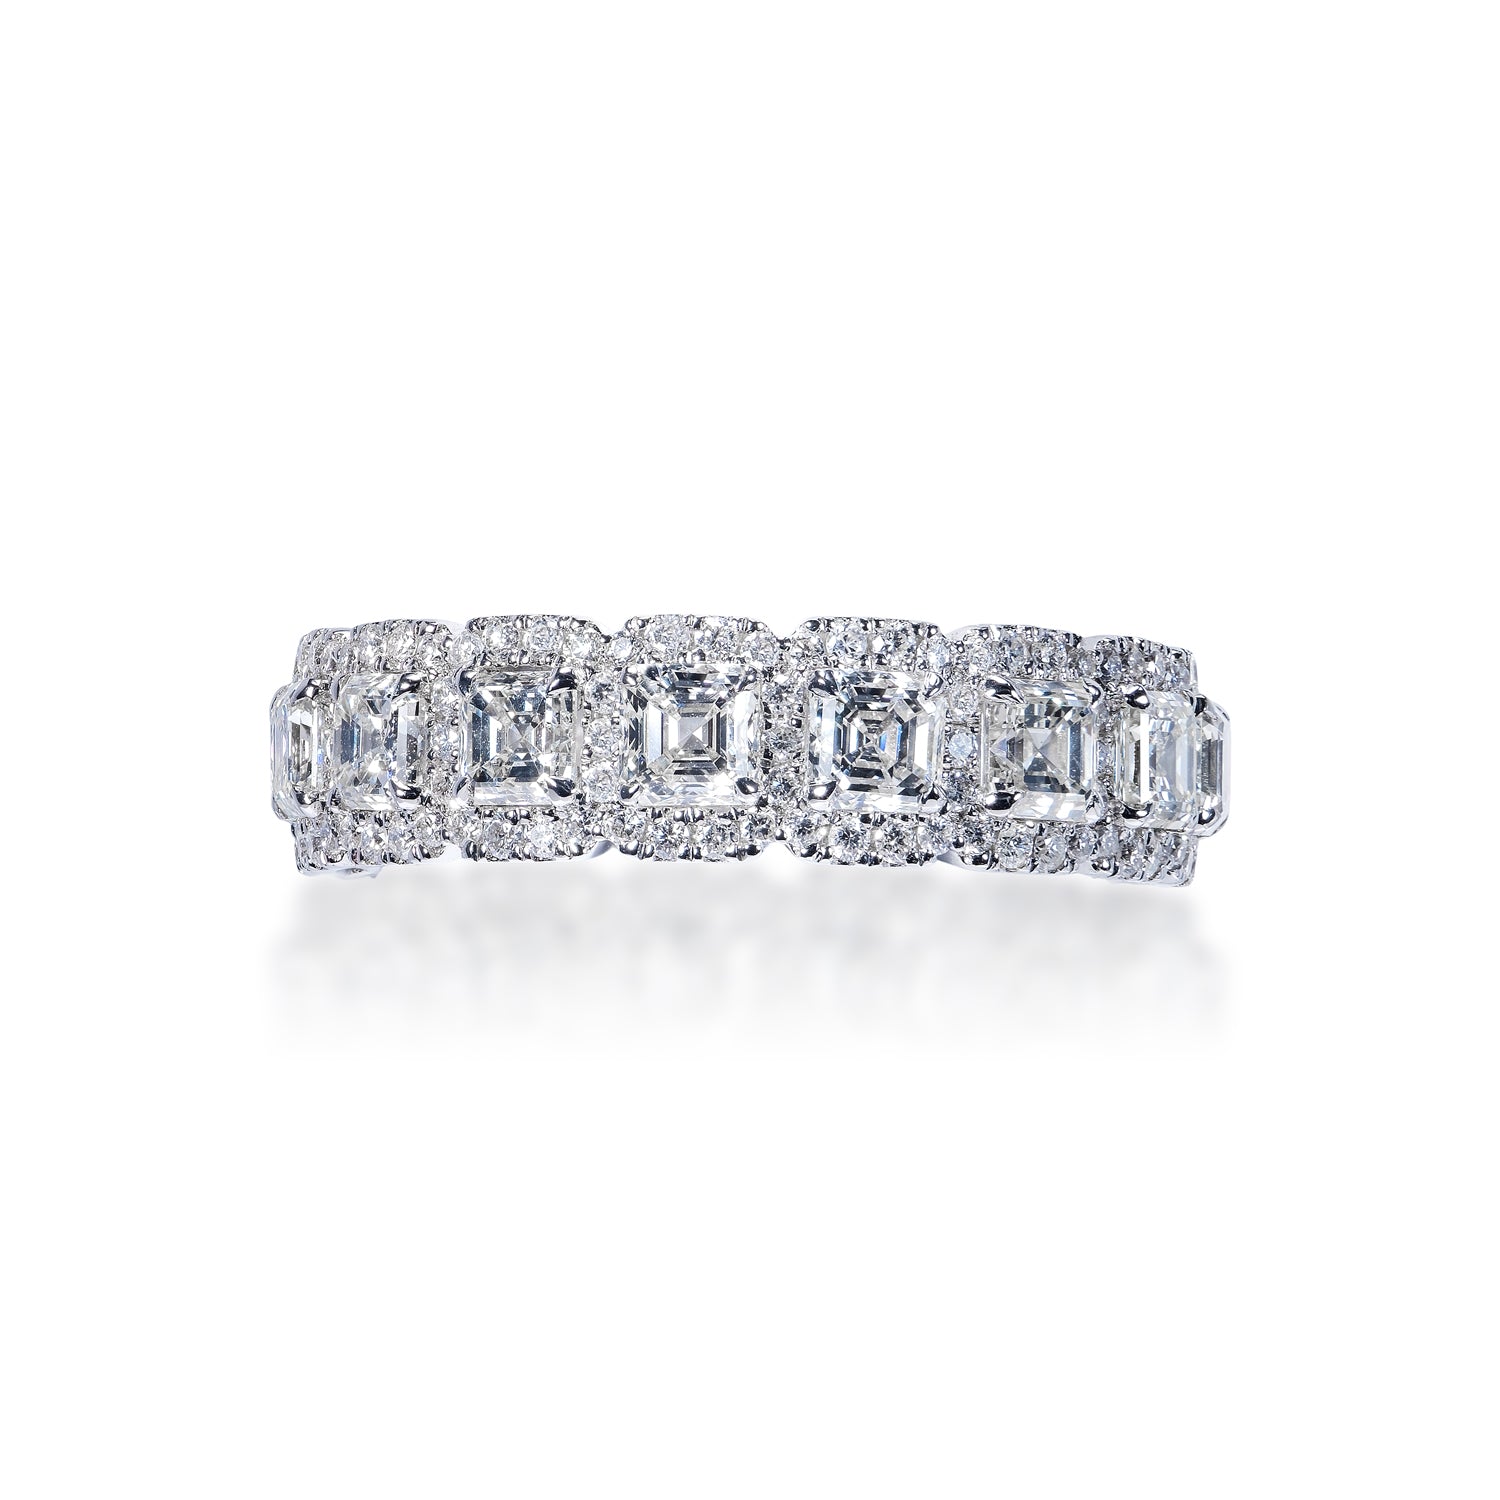 Alia 4 Carat Asscher Diamond With Halos Eternity Band in 18k White Gold Shared Prong Front View